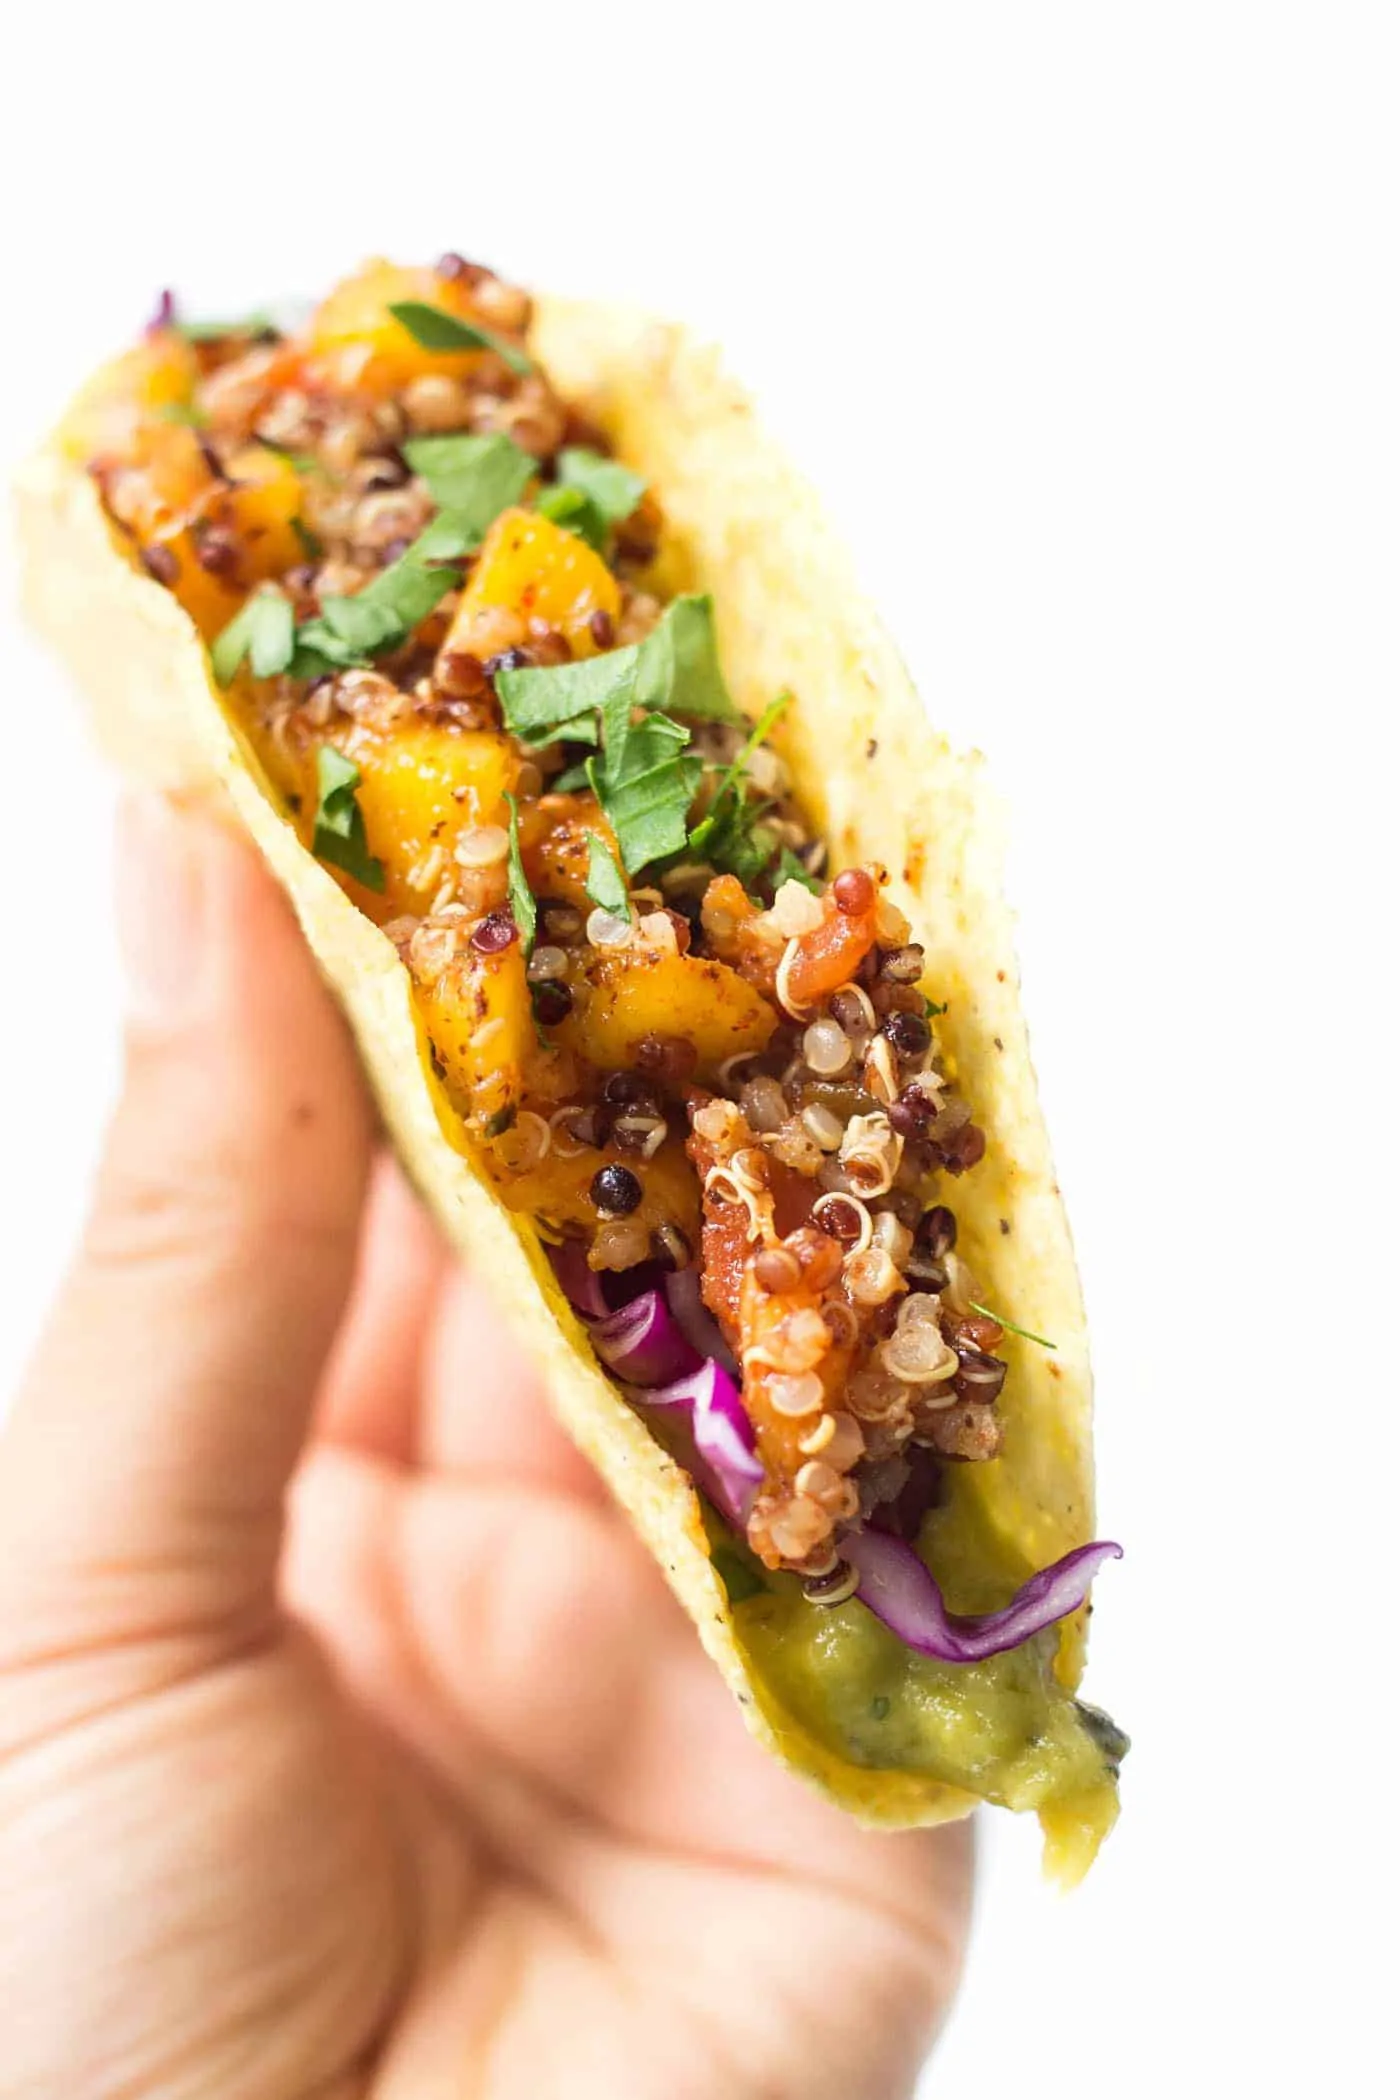 Mango-Lime Quinoa Tacos -- with a spicy meatless filling, creamy guacamole and crunchy red cabbage! So simple and SO HEALTHY! [vegan]